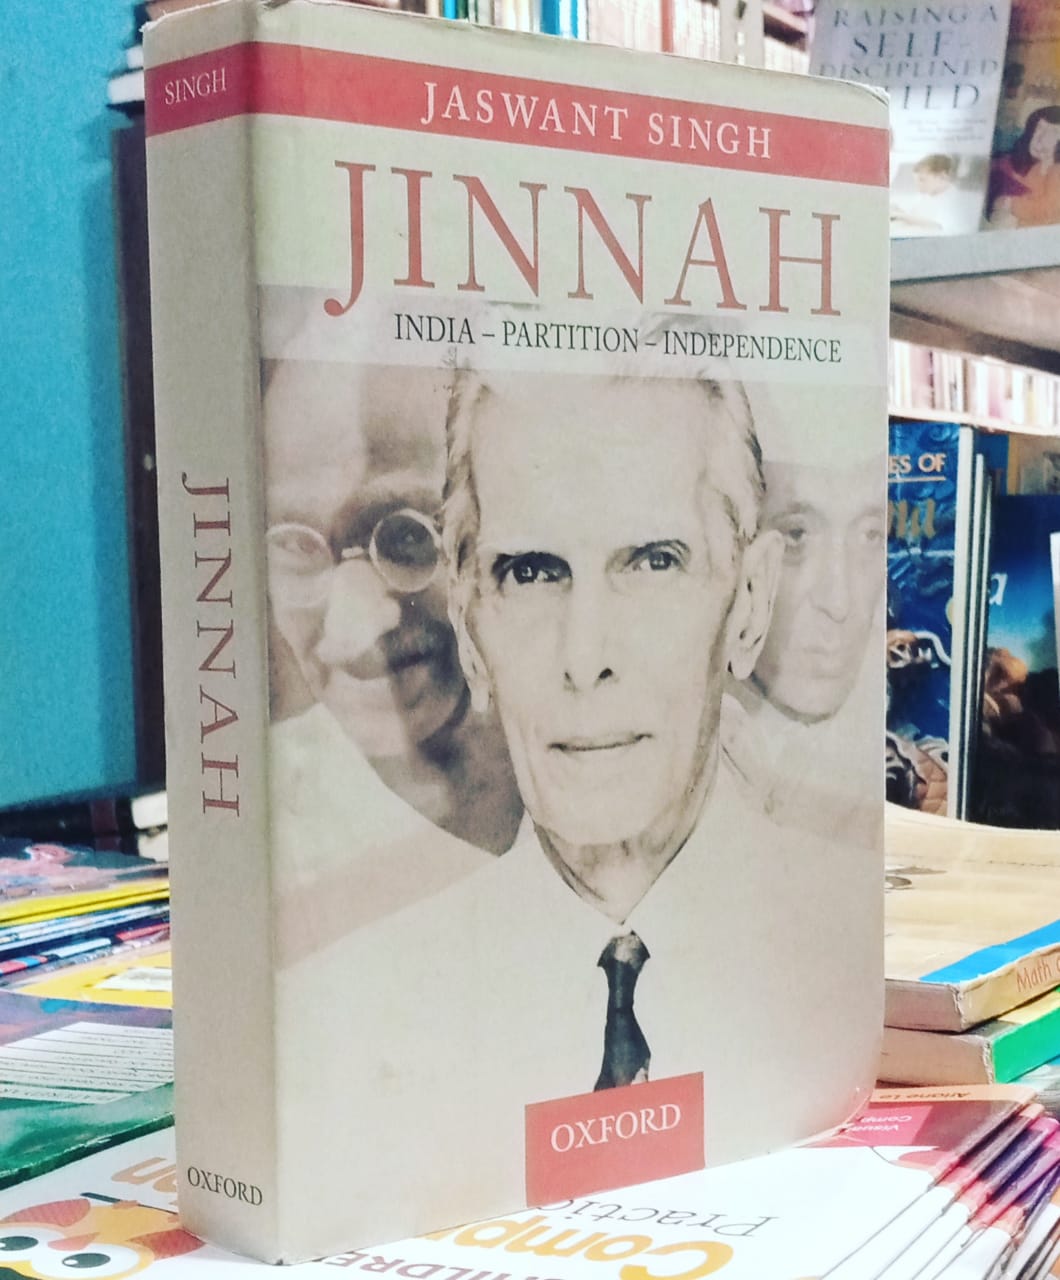 innah  india-partition-independence by jaswant singh